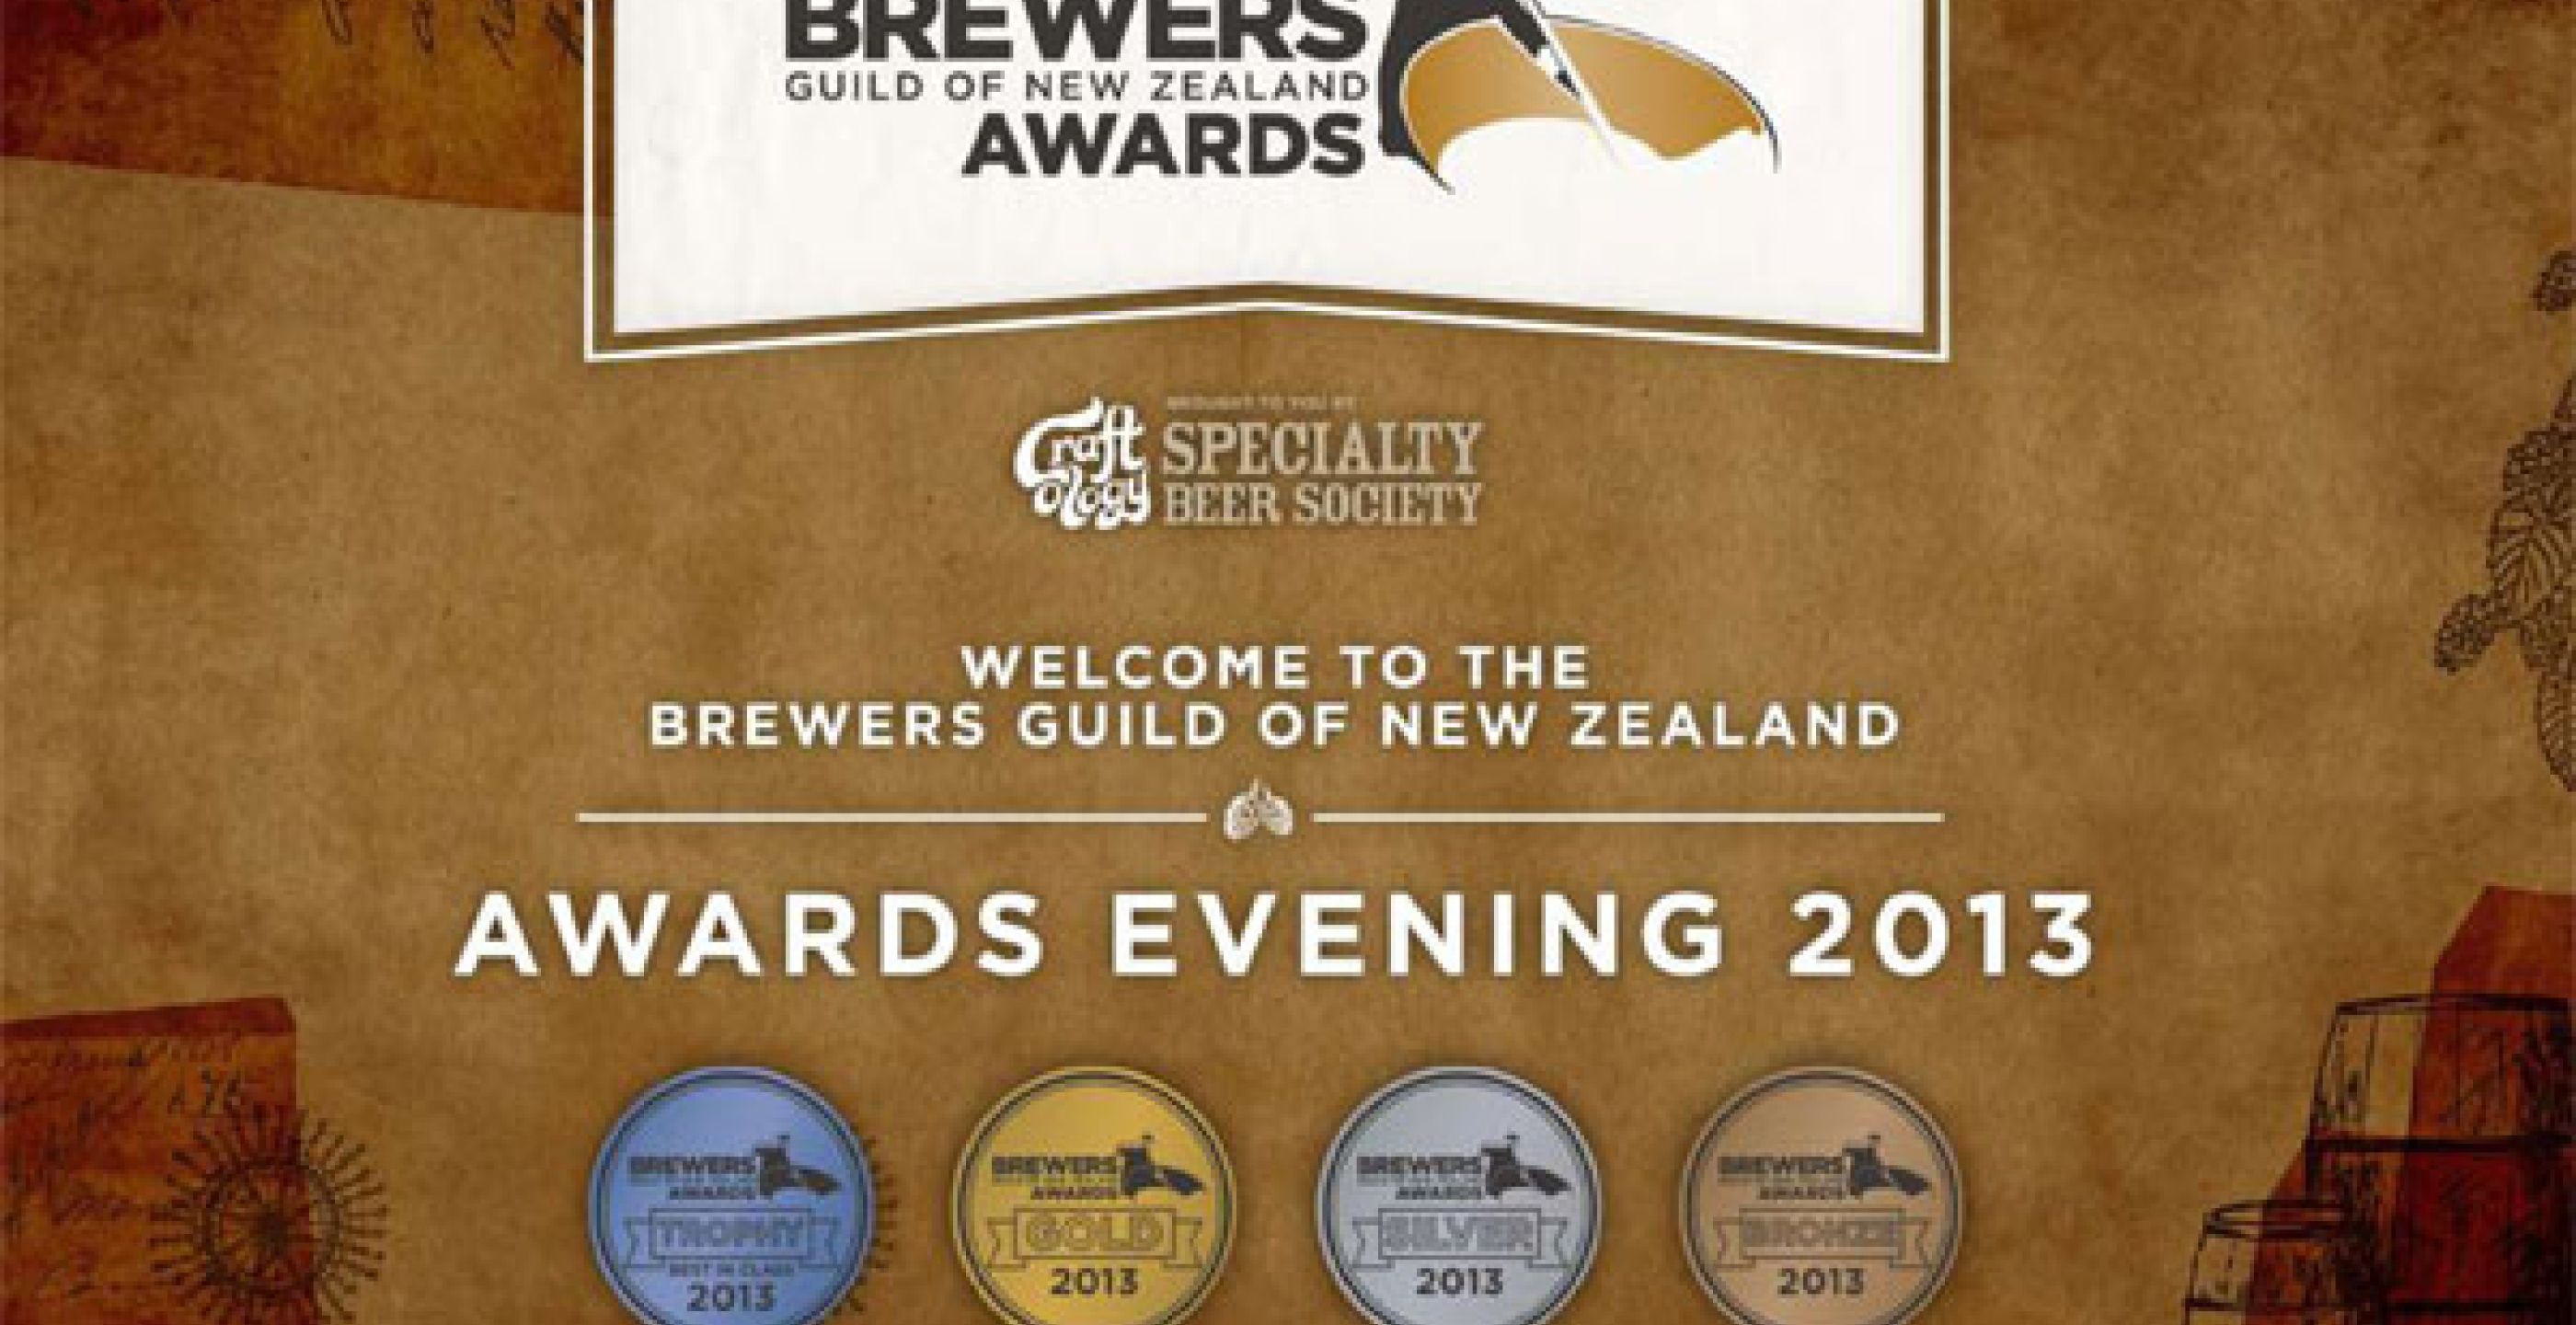 NZ Brewers Guild Awards 2013: The Winners